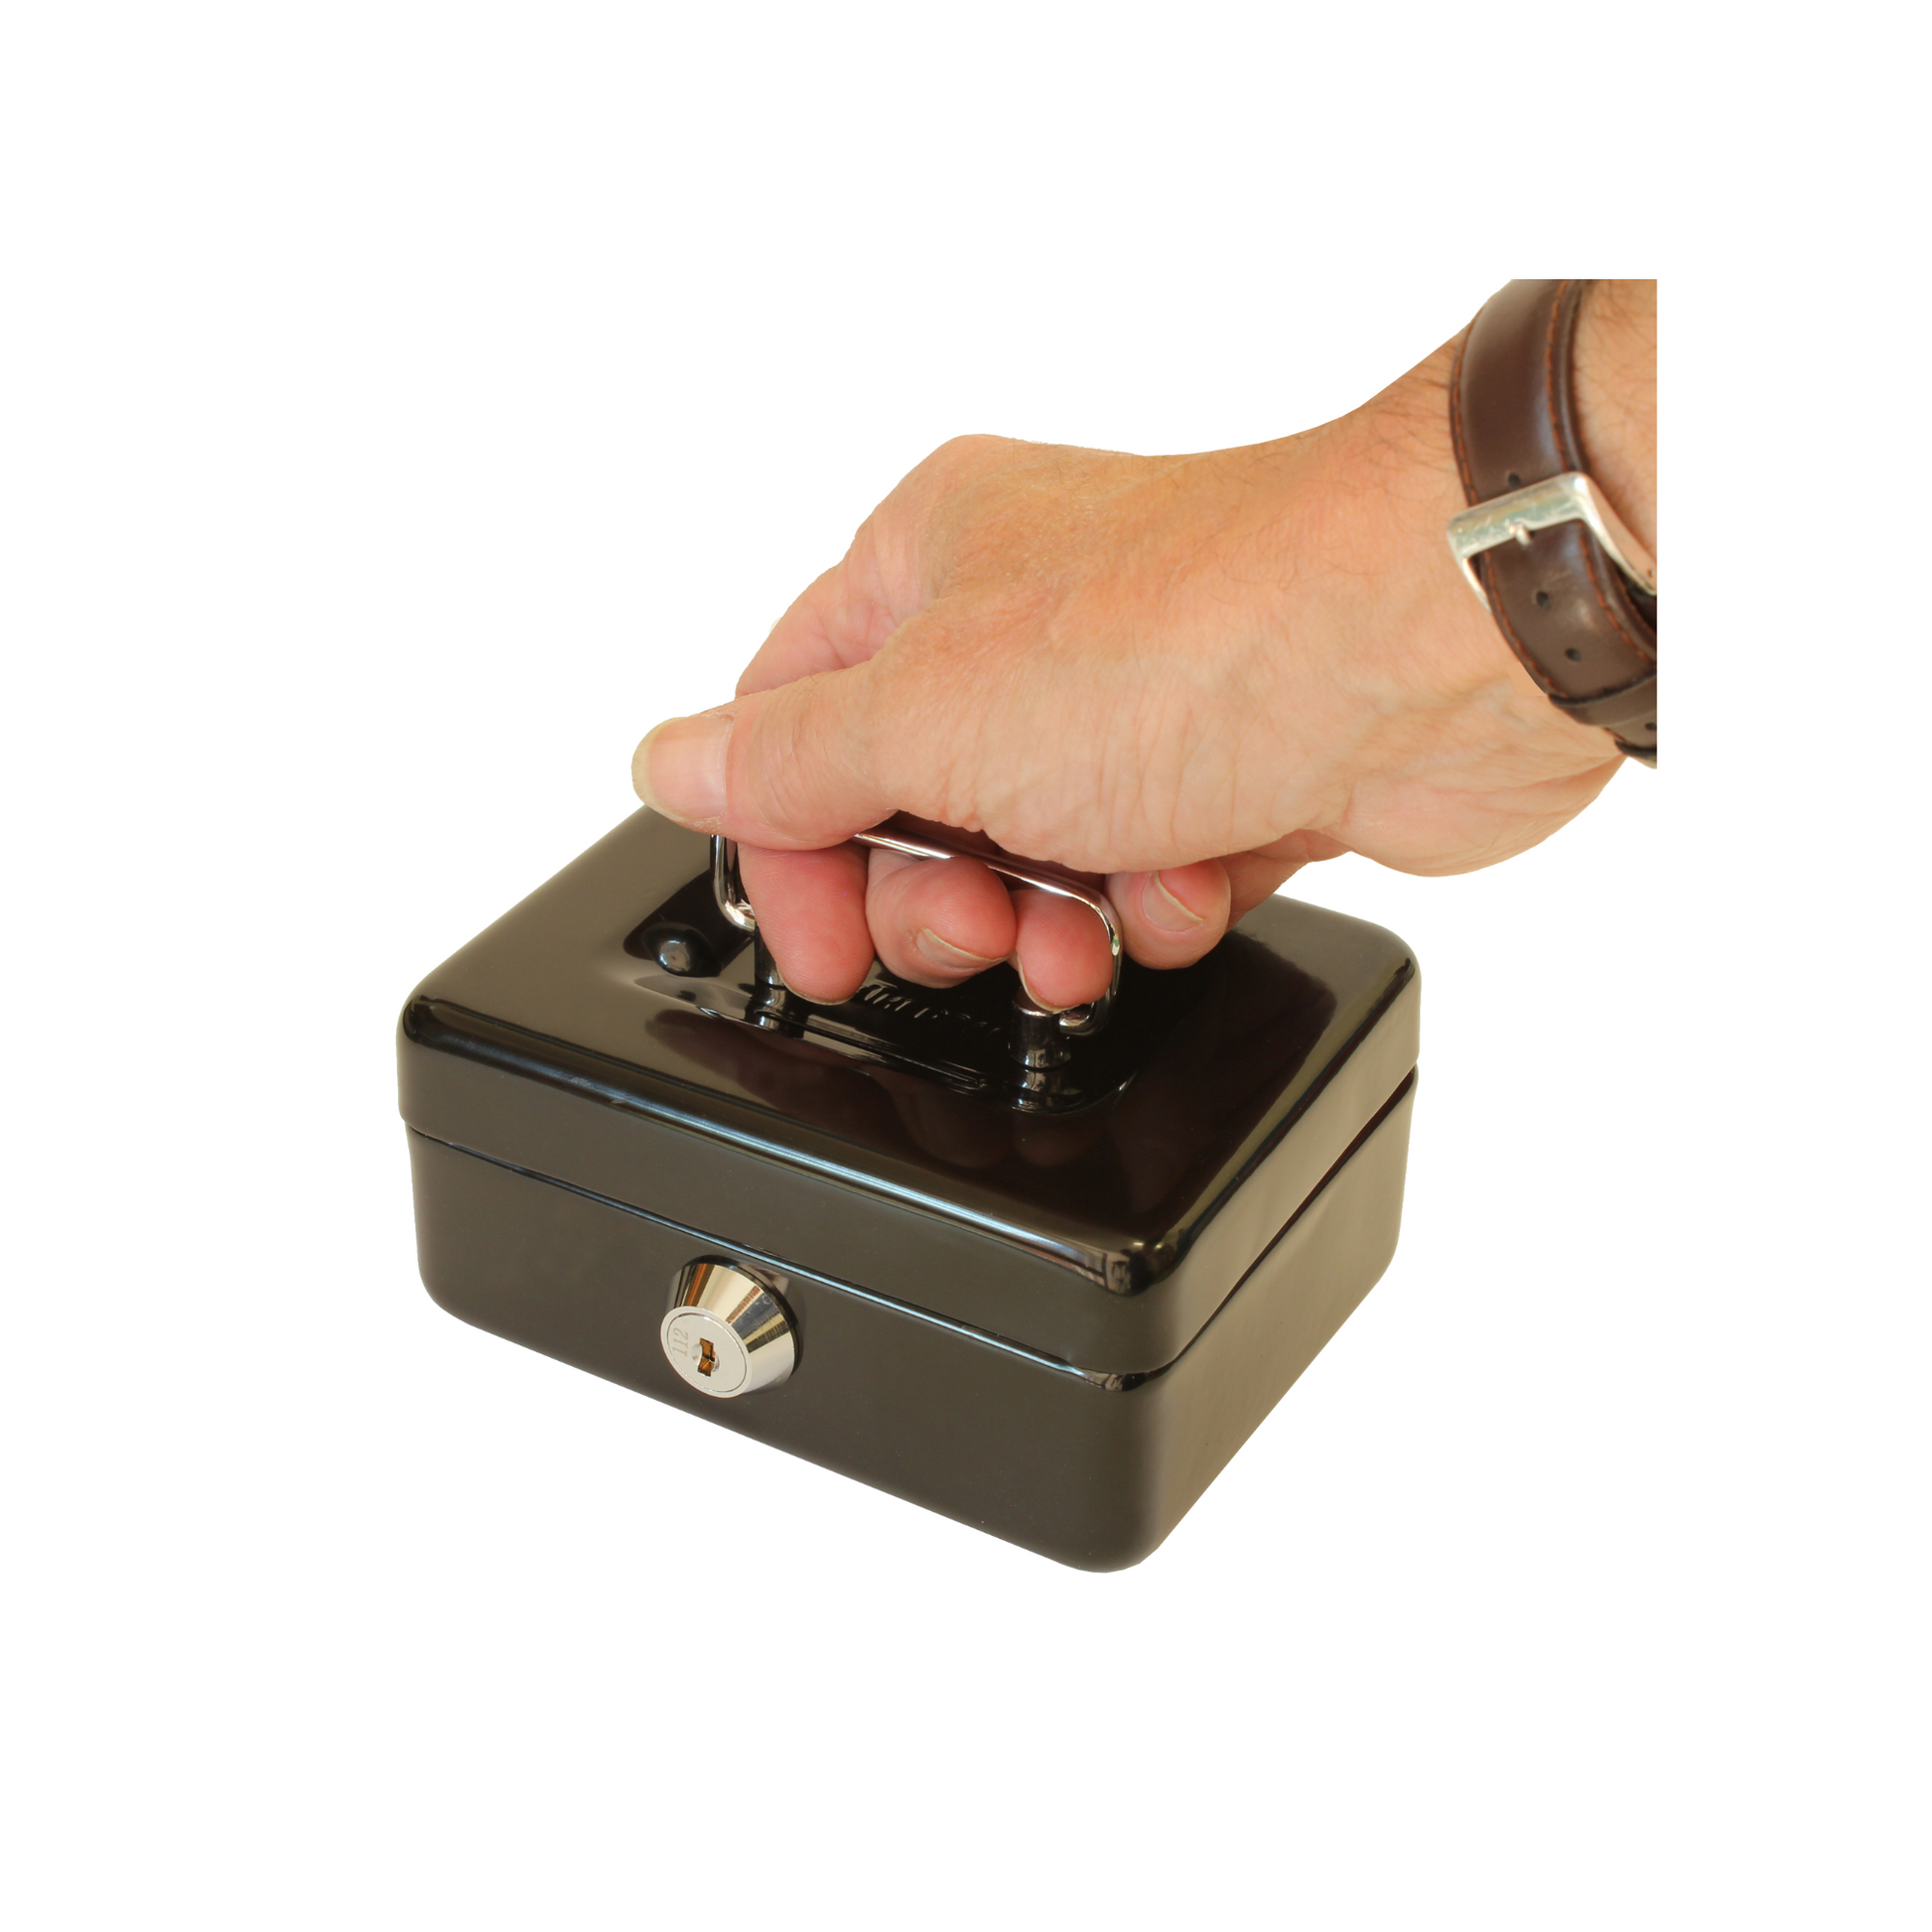 A hand lifting a 4-Inch key lockable black cash box by the handle, showing the size comparison between a hand and the size of the box.